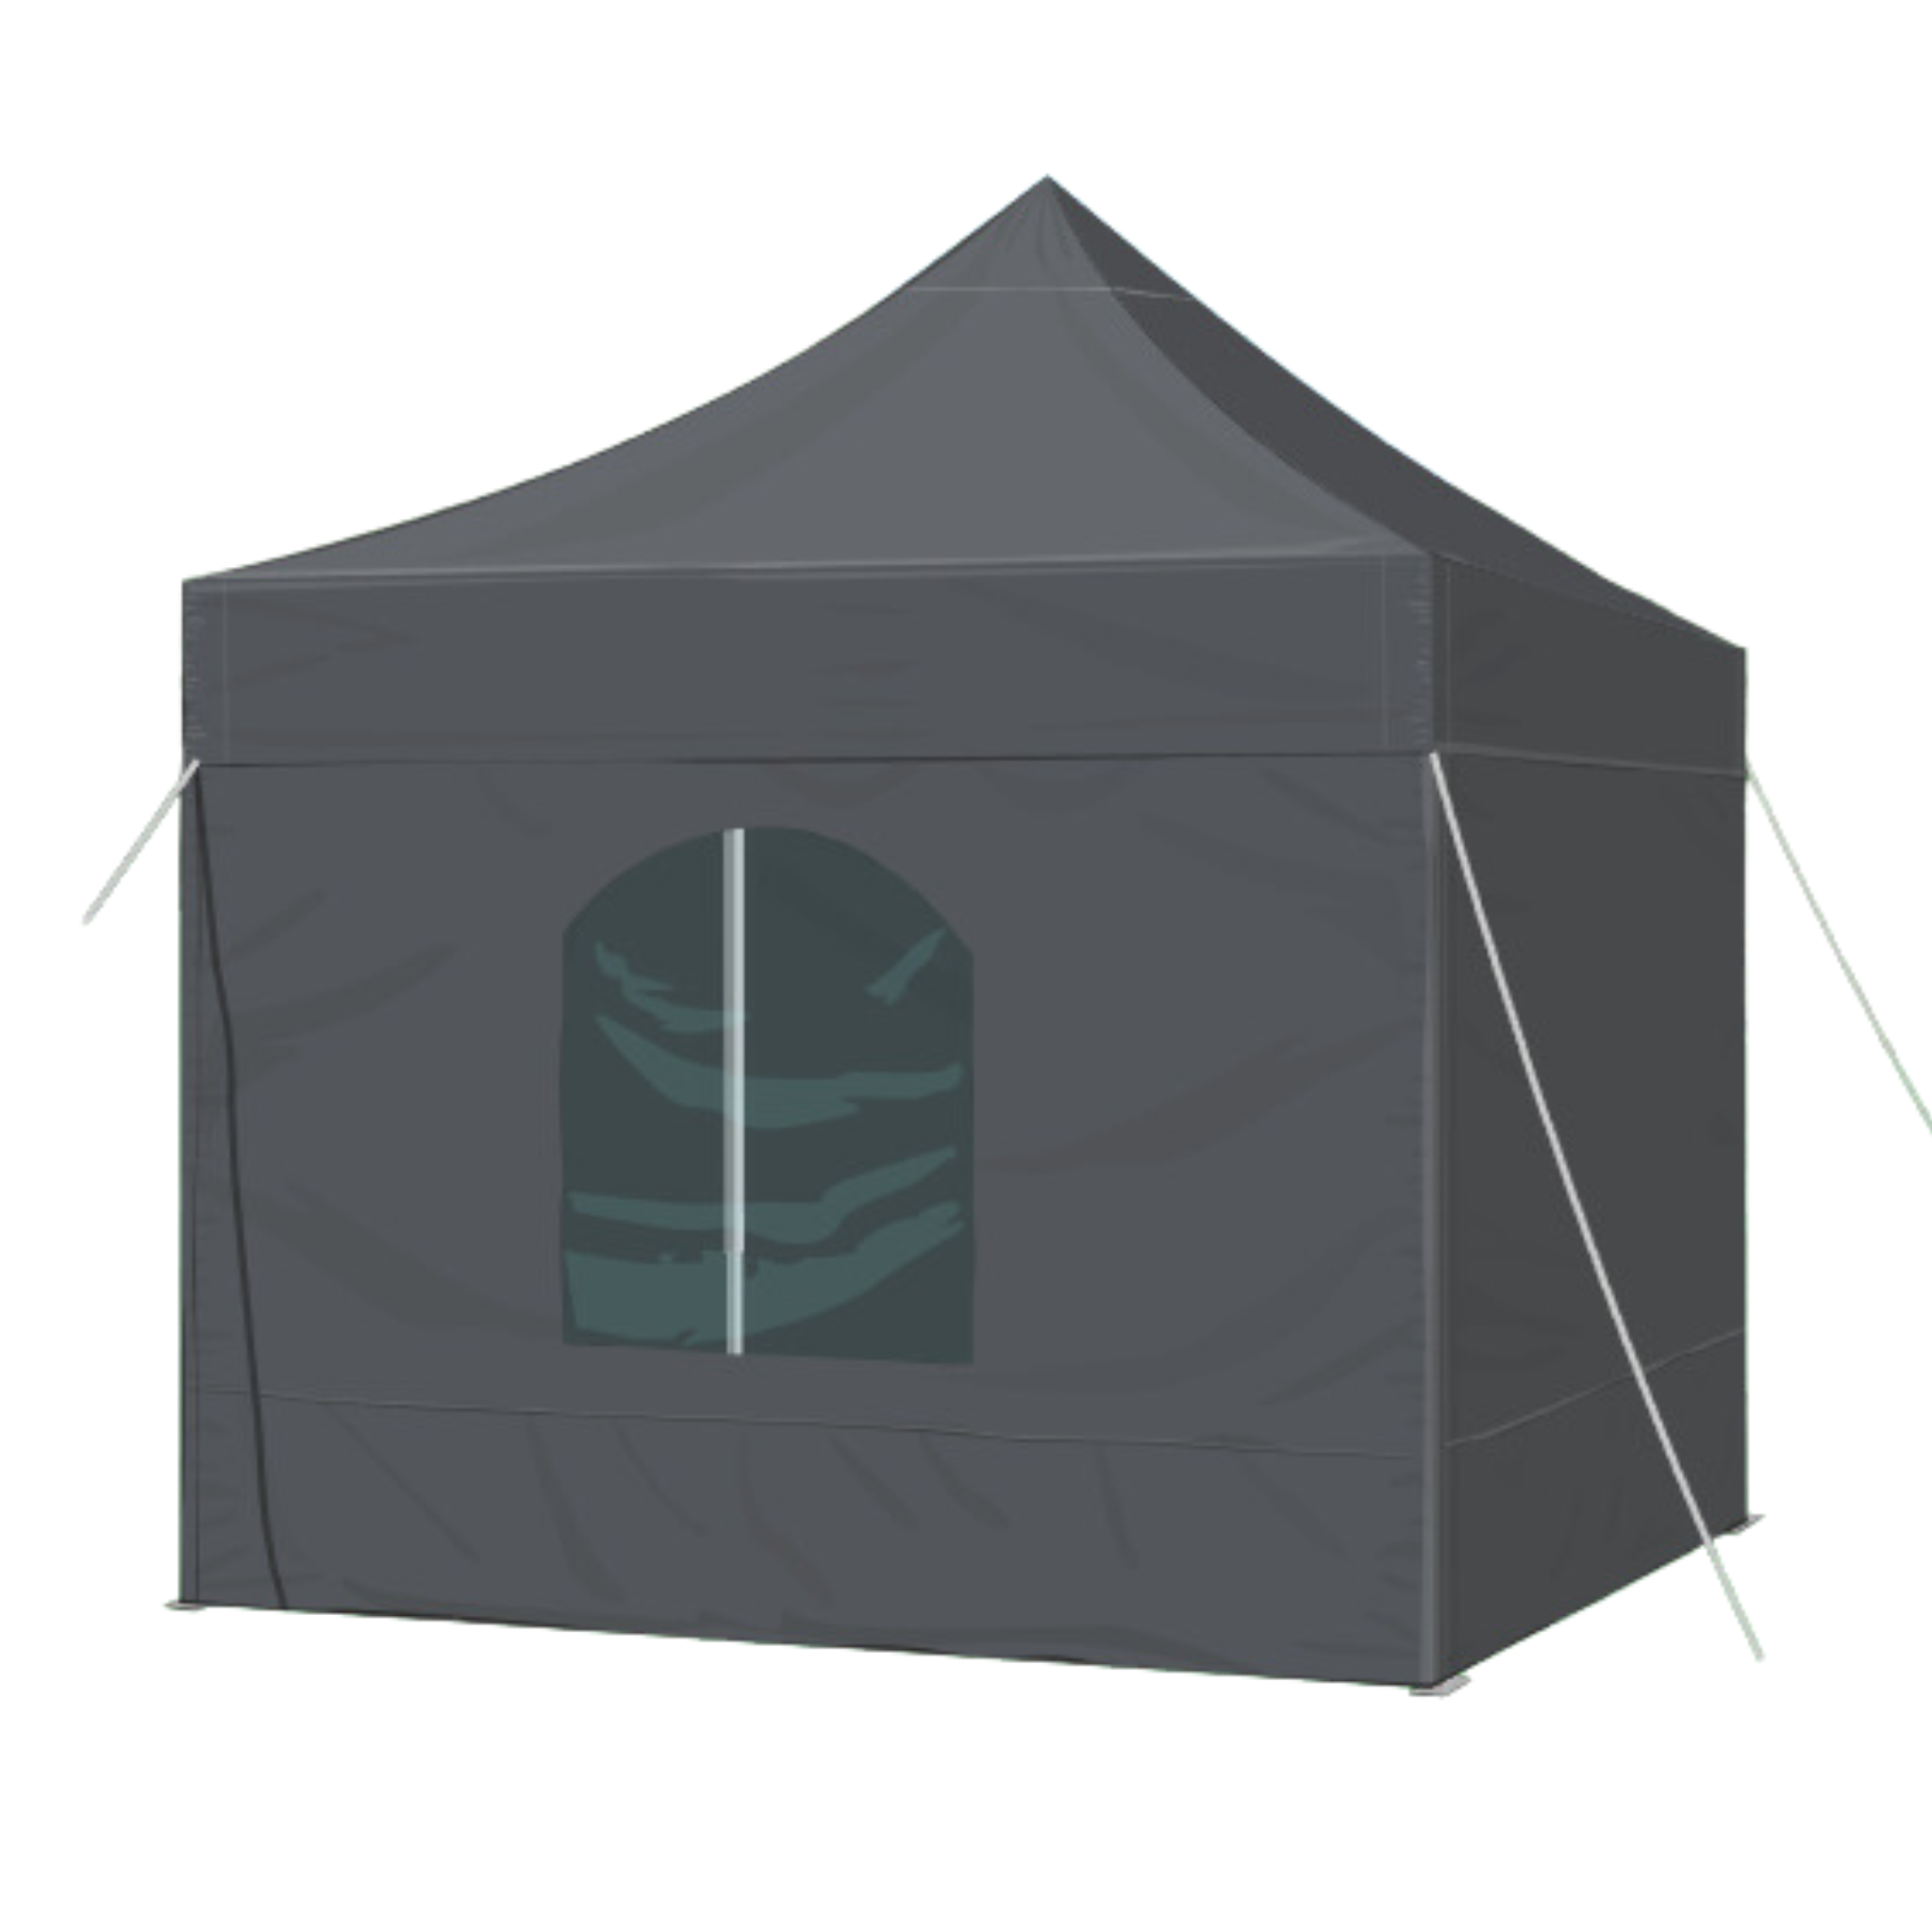 Lavabis folding tent system side walls 3x3 meters